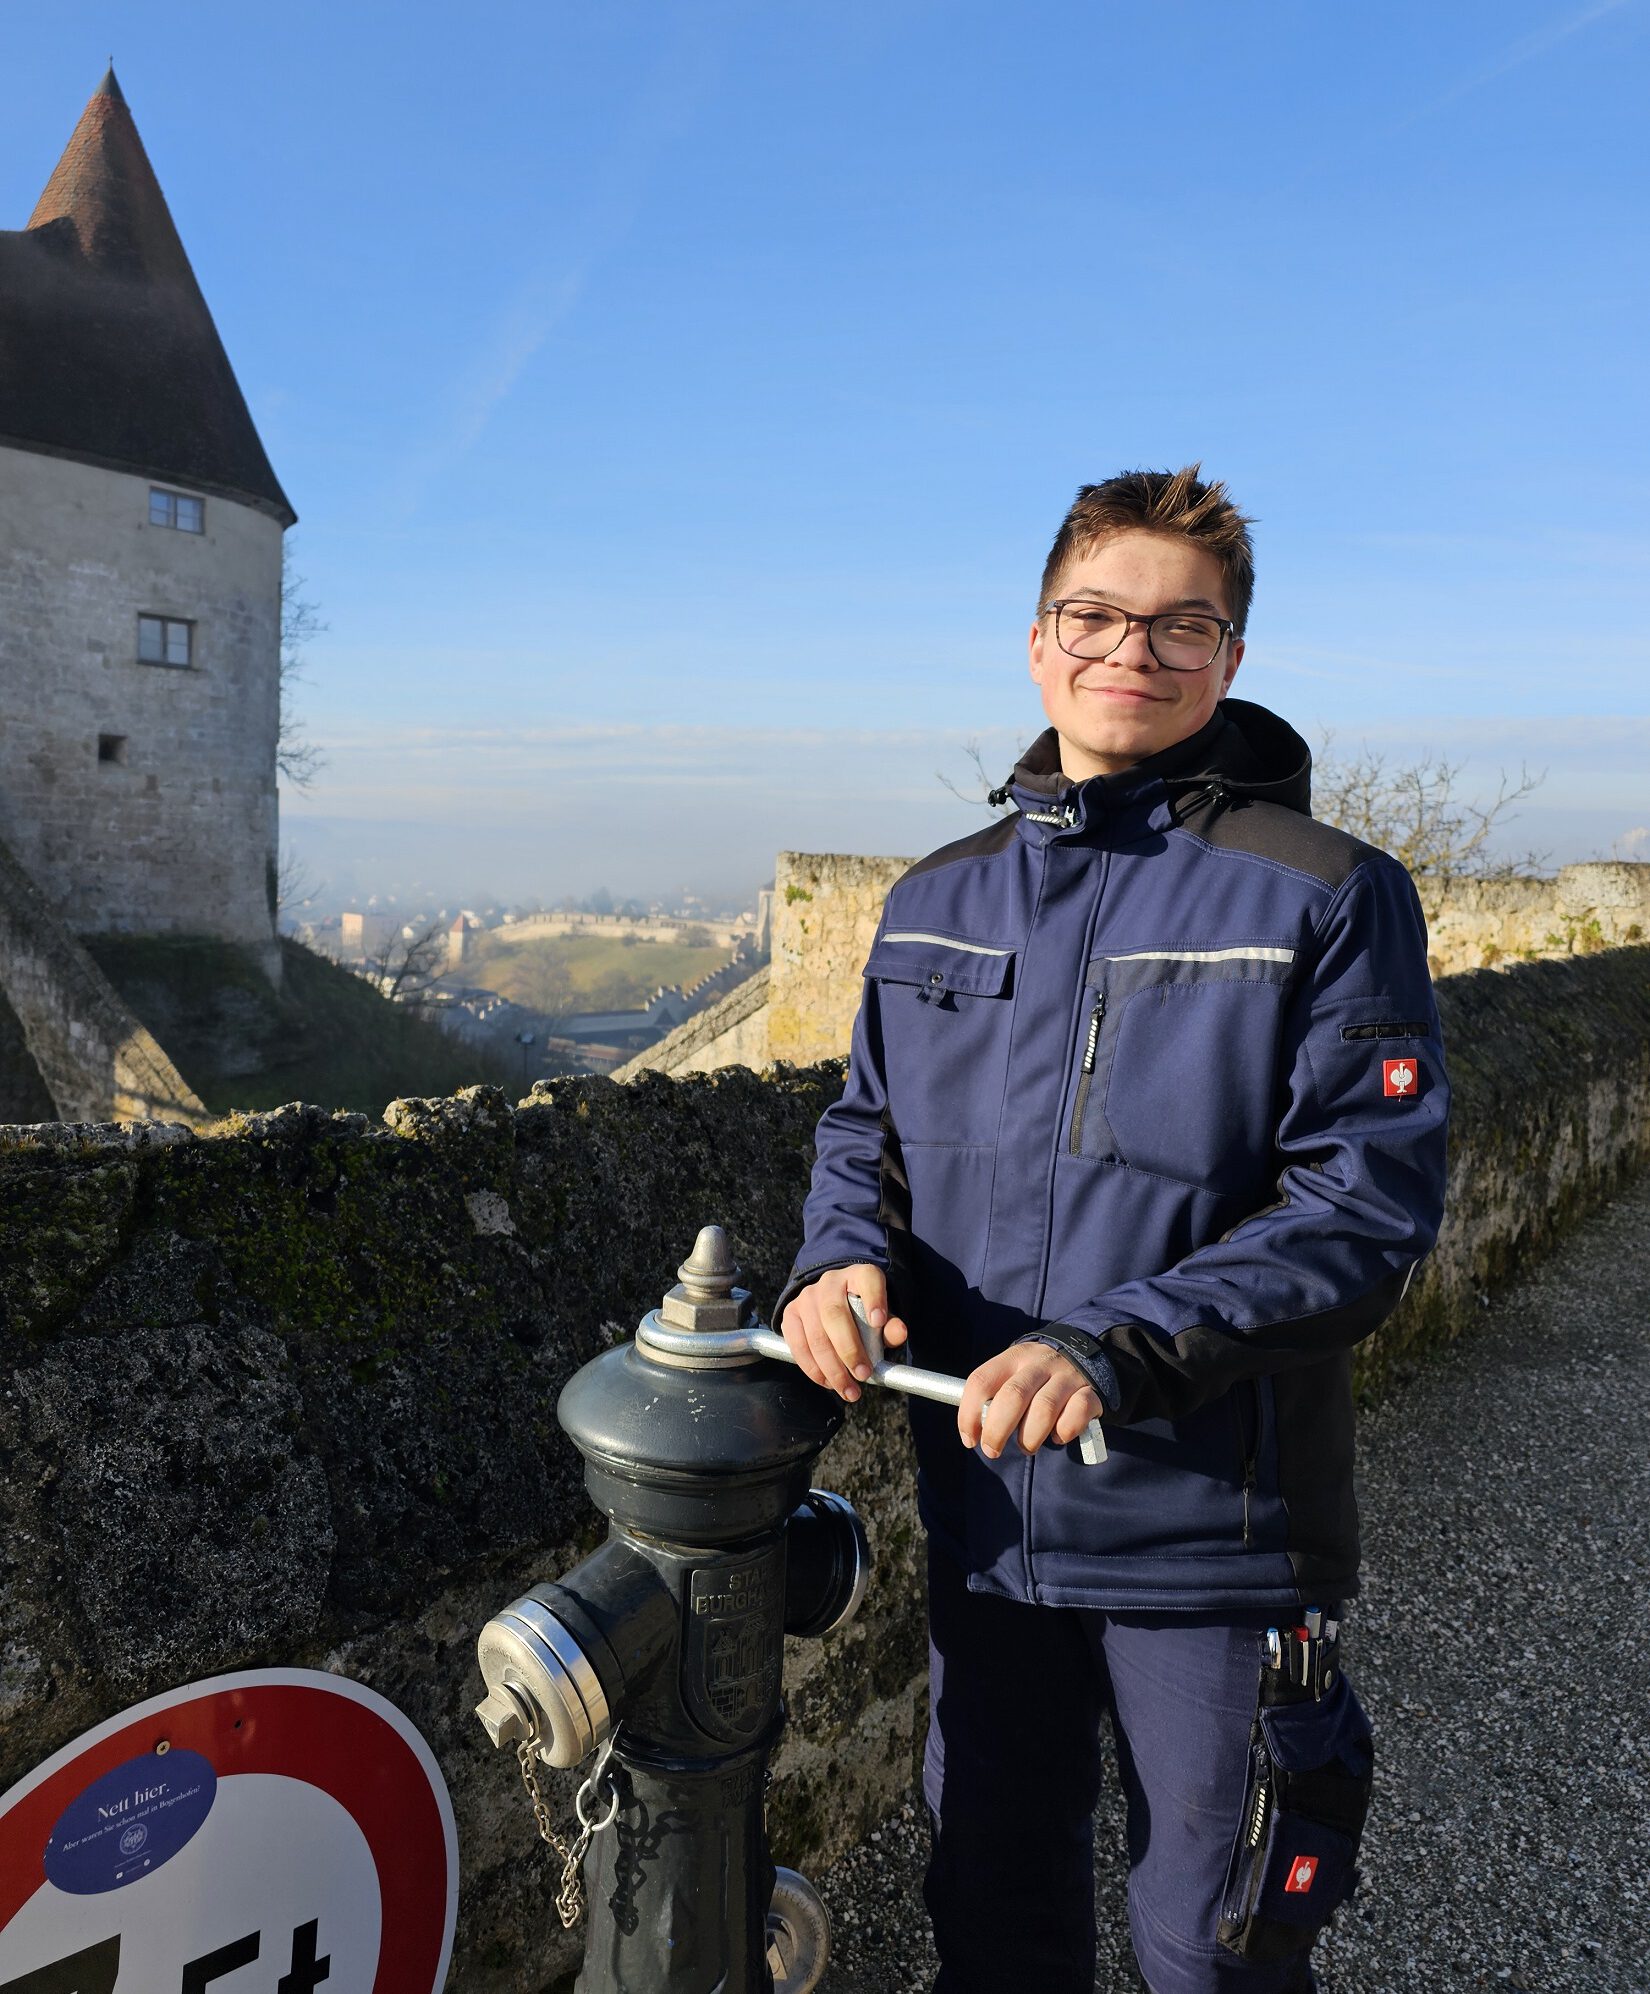 Luca Ringsquandl, a trainee water supply technology specialist at Stadtwerke Burghausen, checks one of the hydrants at the castle © Stadt Burghausen/ebh